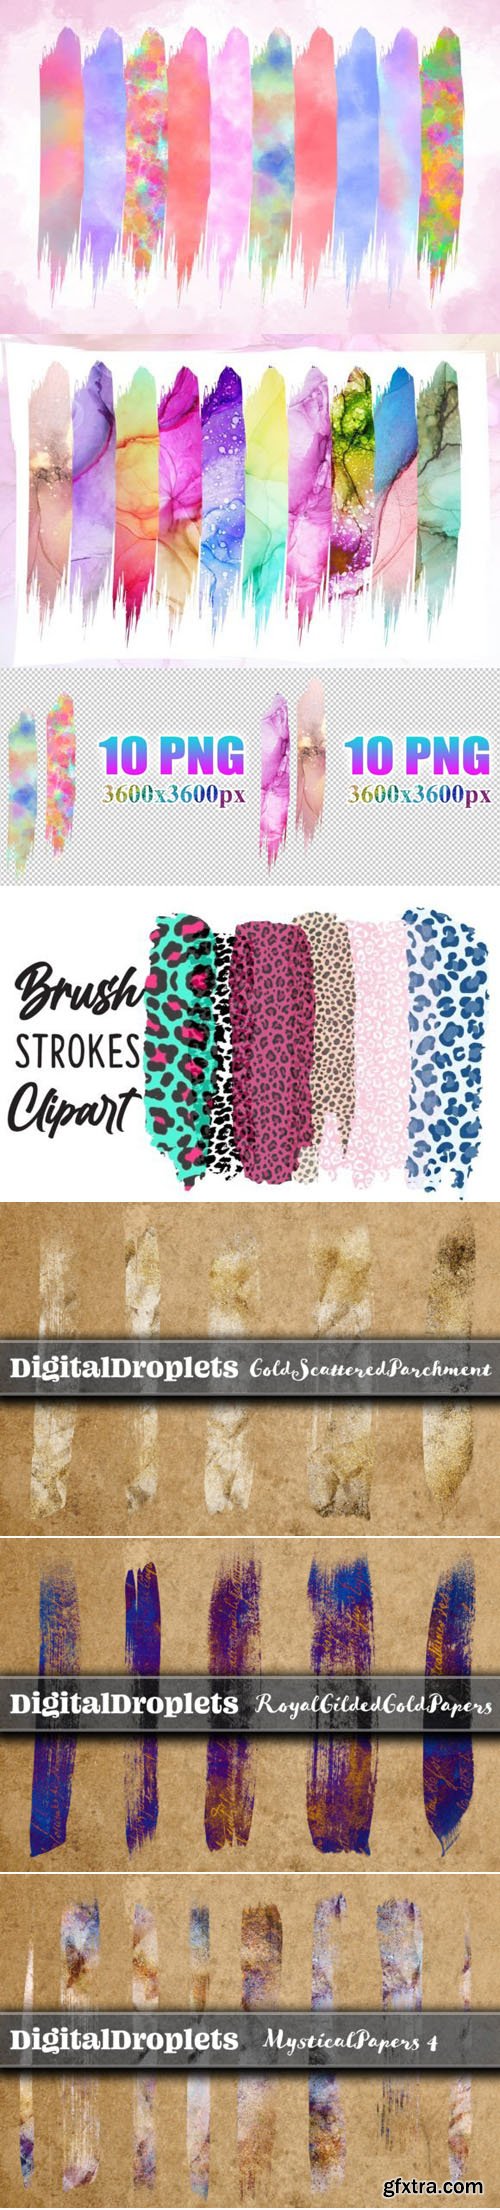 200+ Awesome Brush Strokes Cliparts